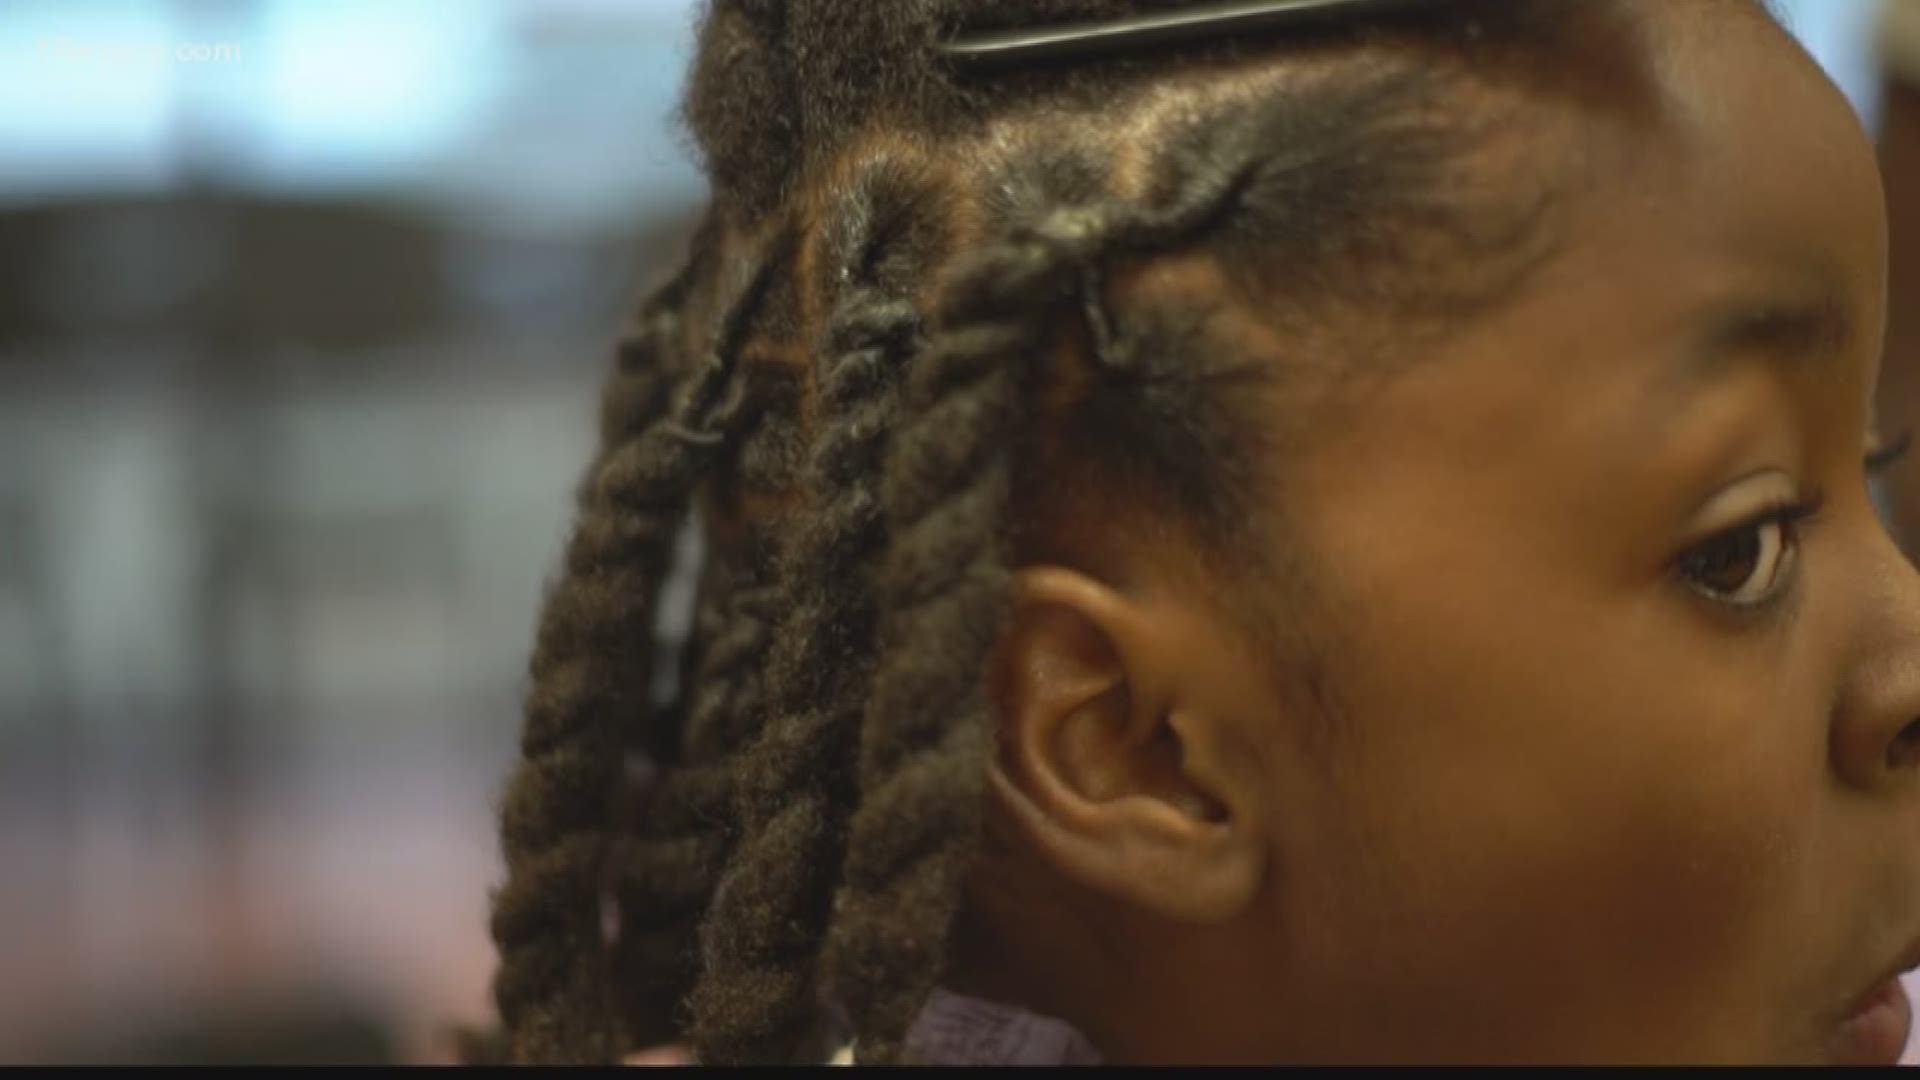 The virtual event held by Toledo Public Schools aims to helping young girls, especially girls of color, embrace and love who they are, as they are.